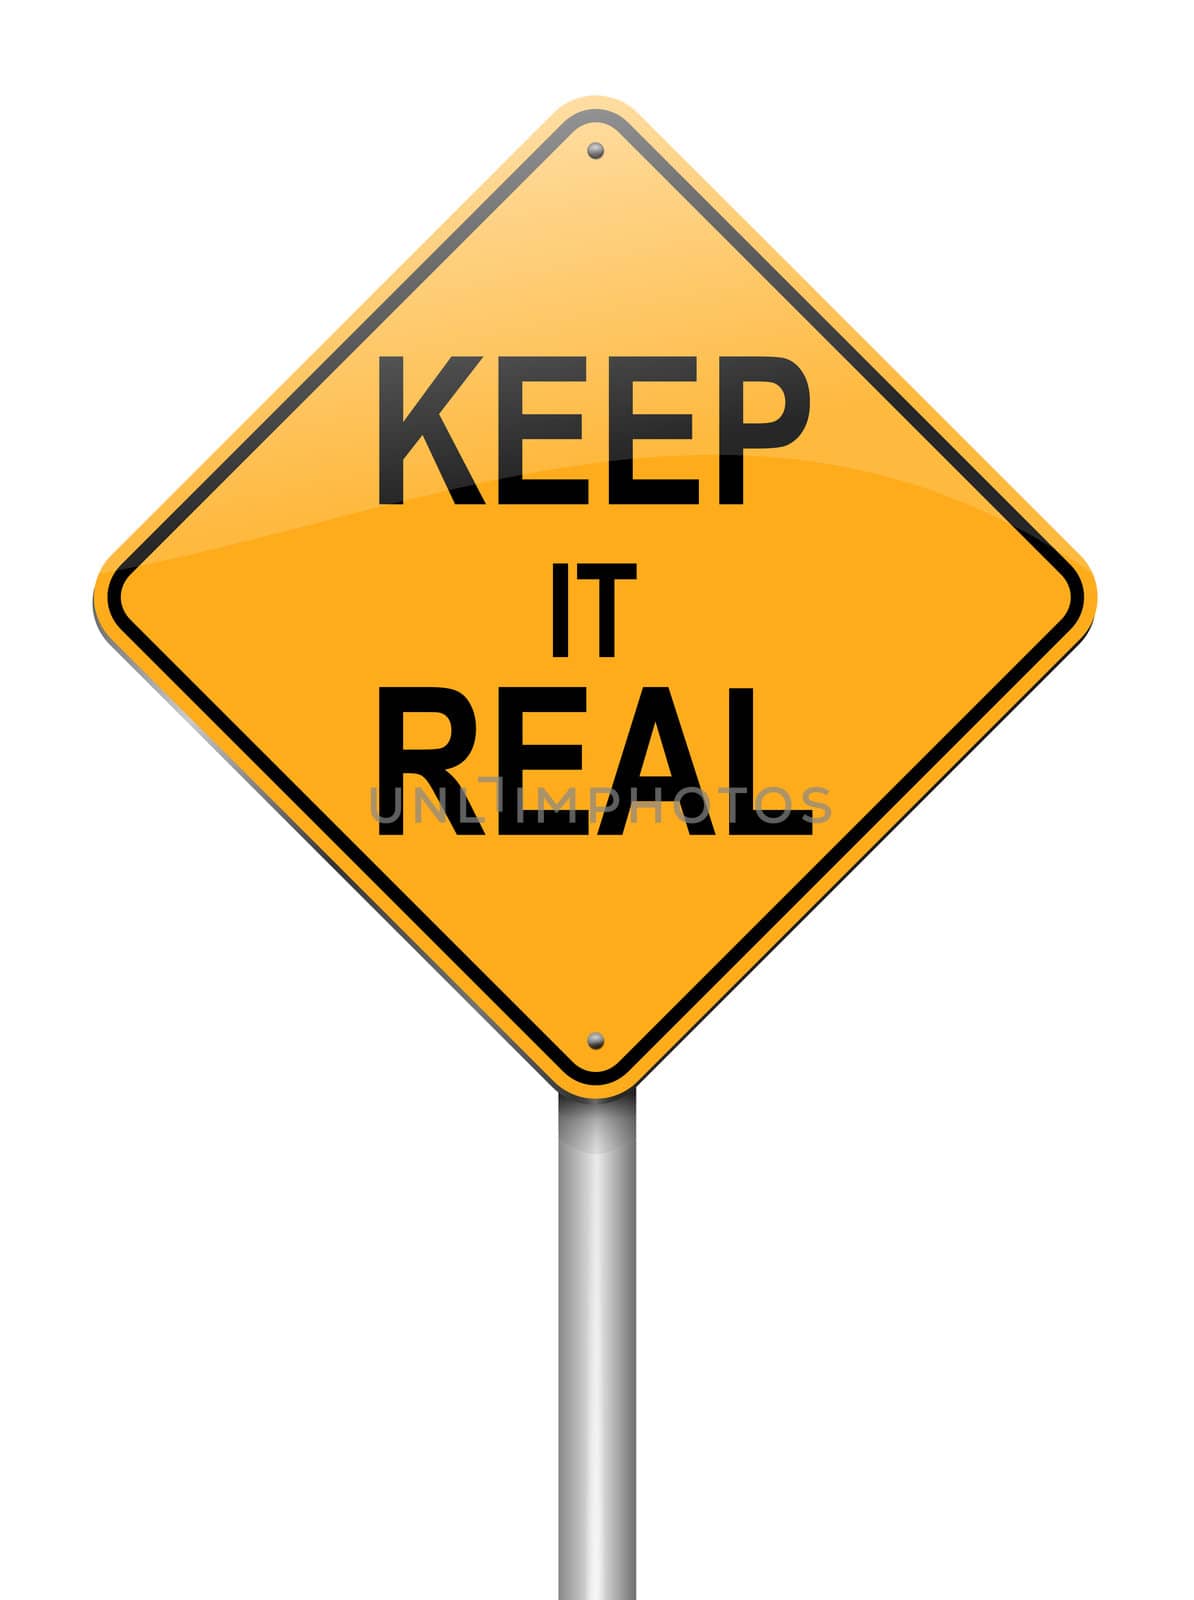 Illustration depicting a roadsign with a keep it real concept. White background.